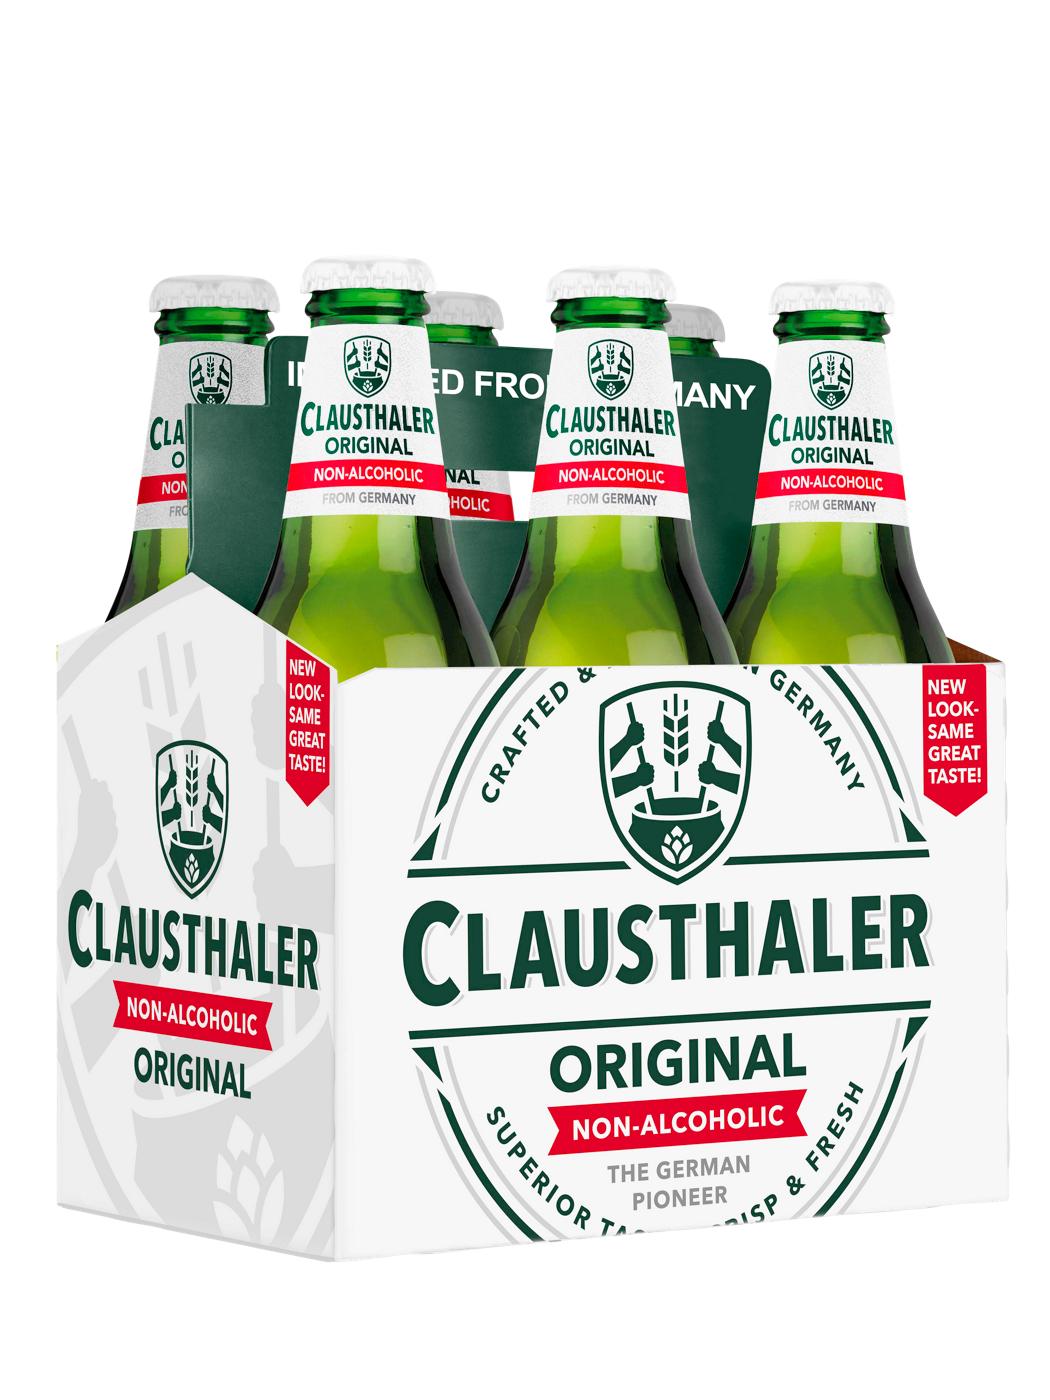 Clausthaler Non-Alcoholic Beer 6 pk Bottles; image 1 of 2